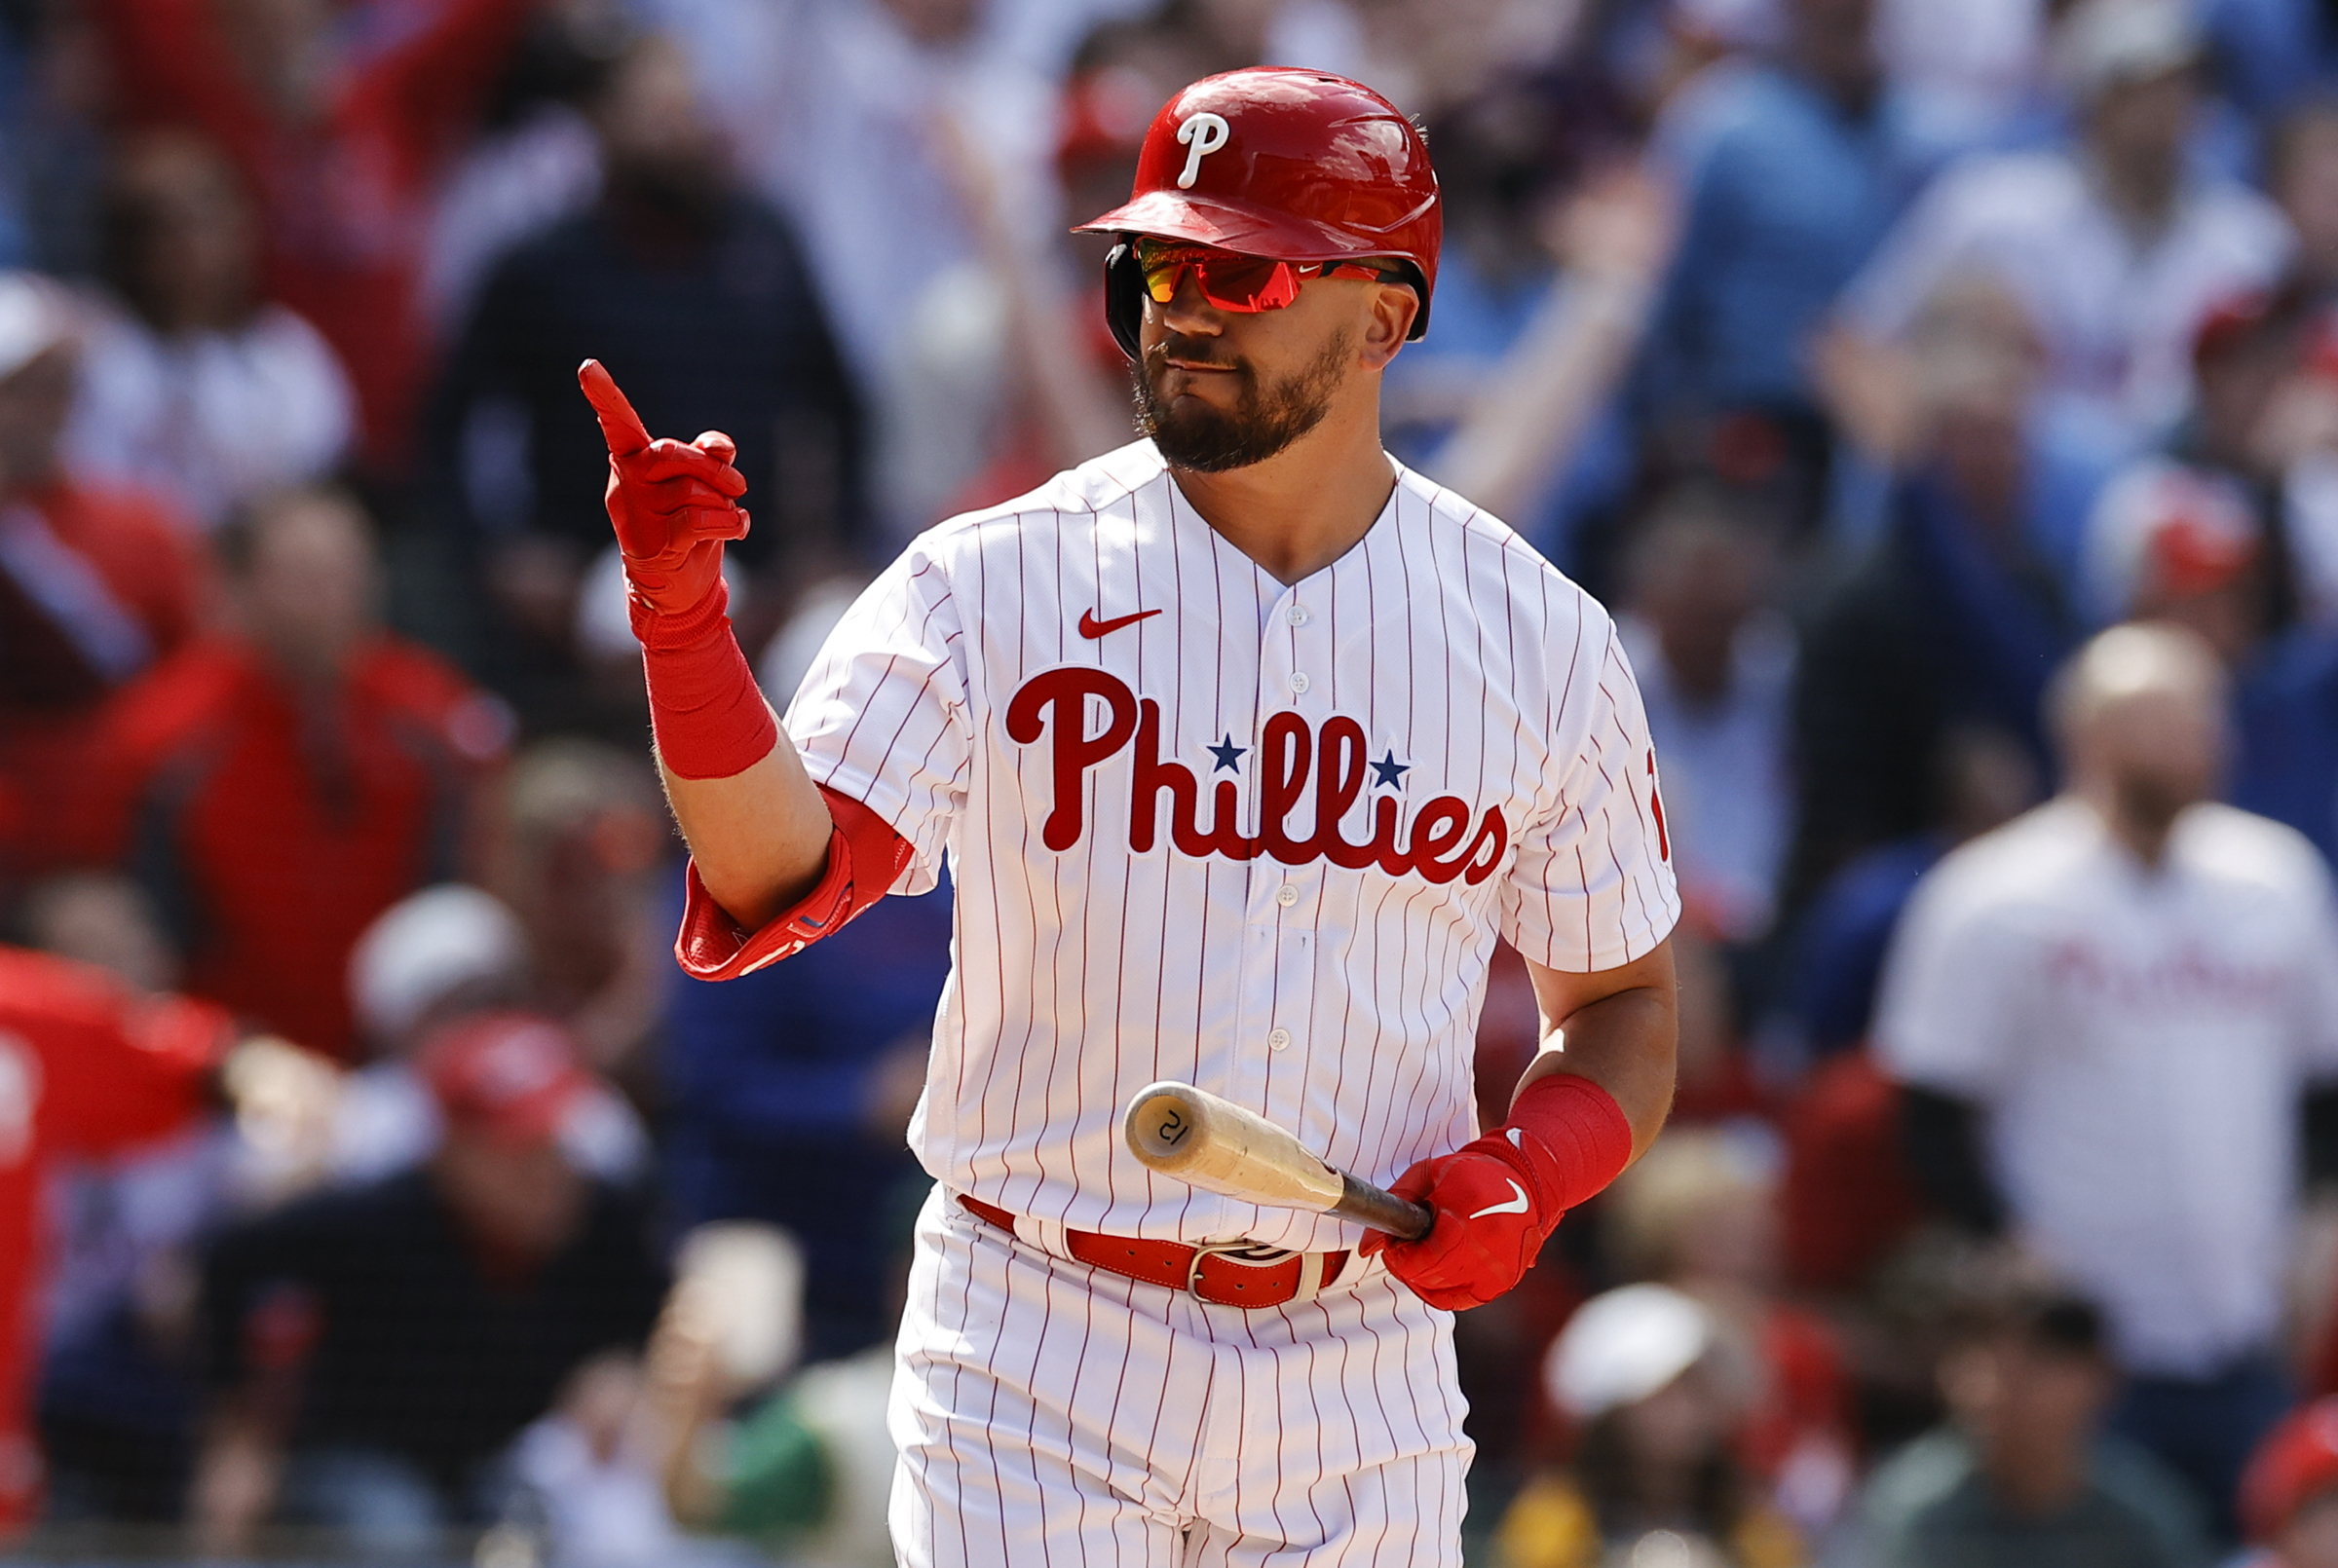 Philadelphia Phillies win over Oakland A's with Kyle Schwarber's